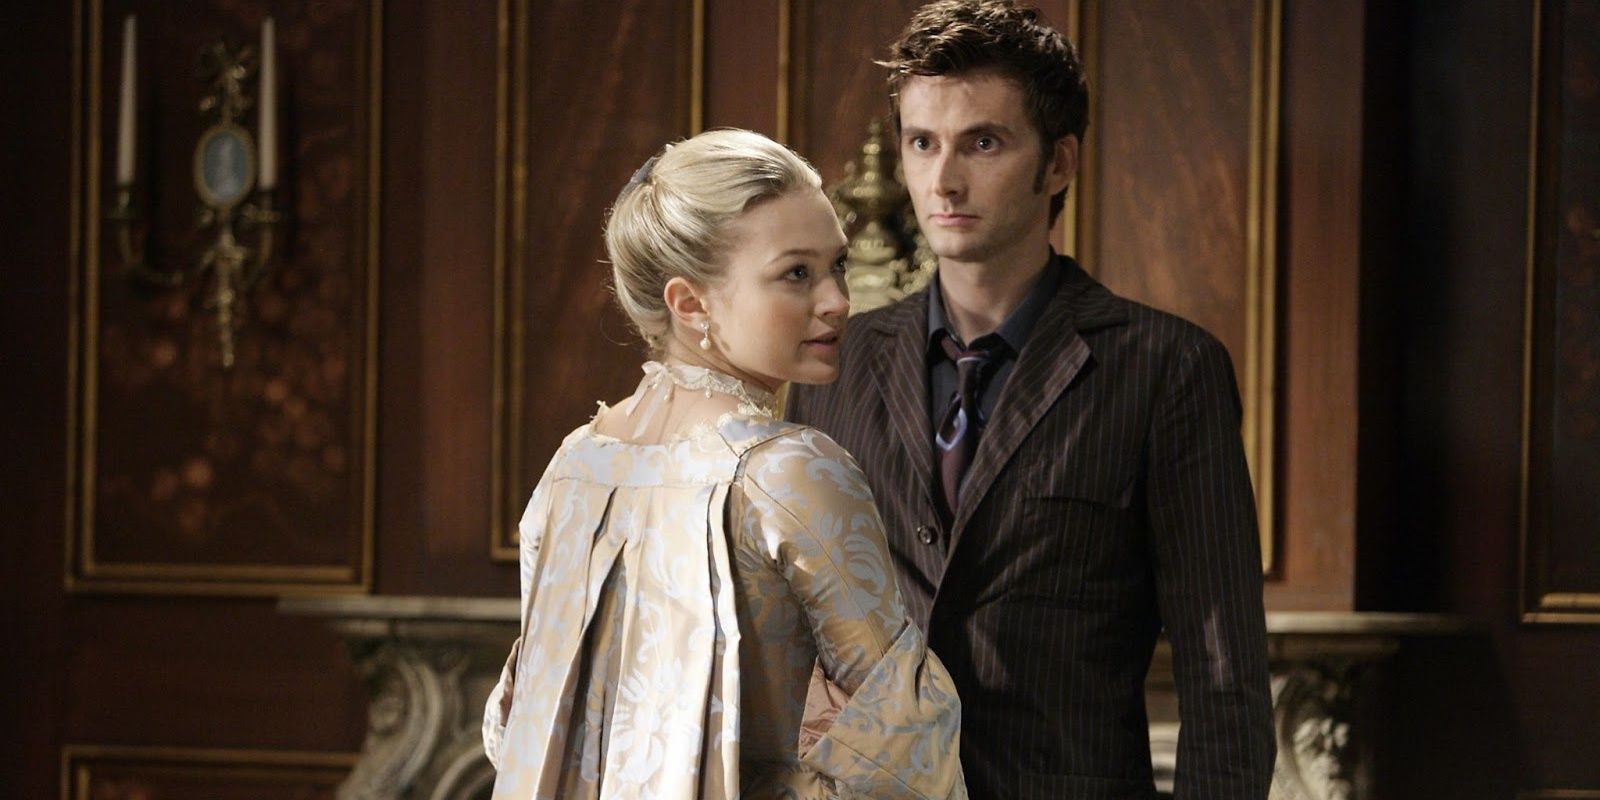 An image of Ten and Madame de Pompadour in Doctor Who